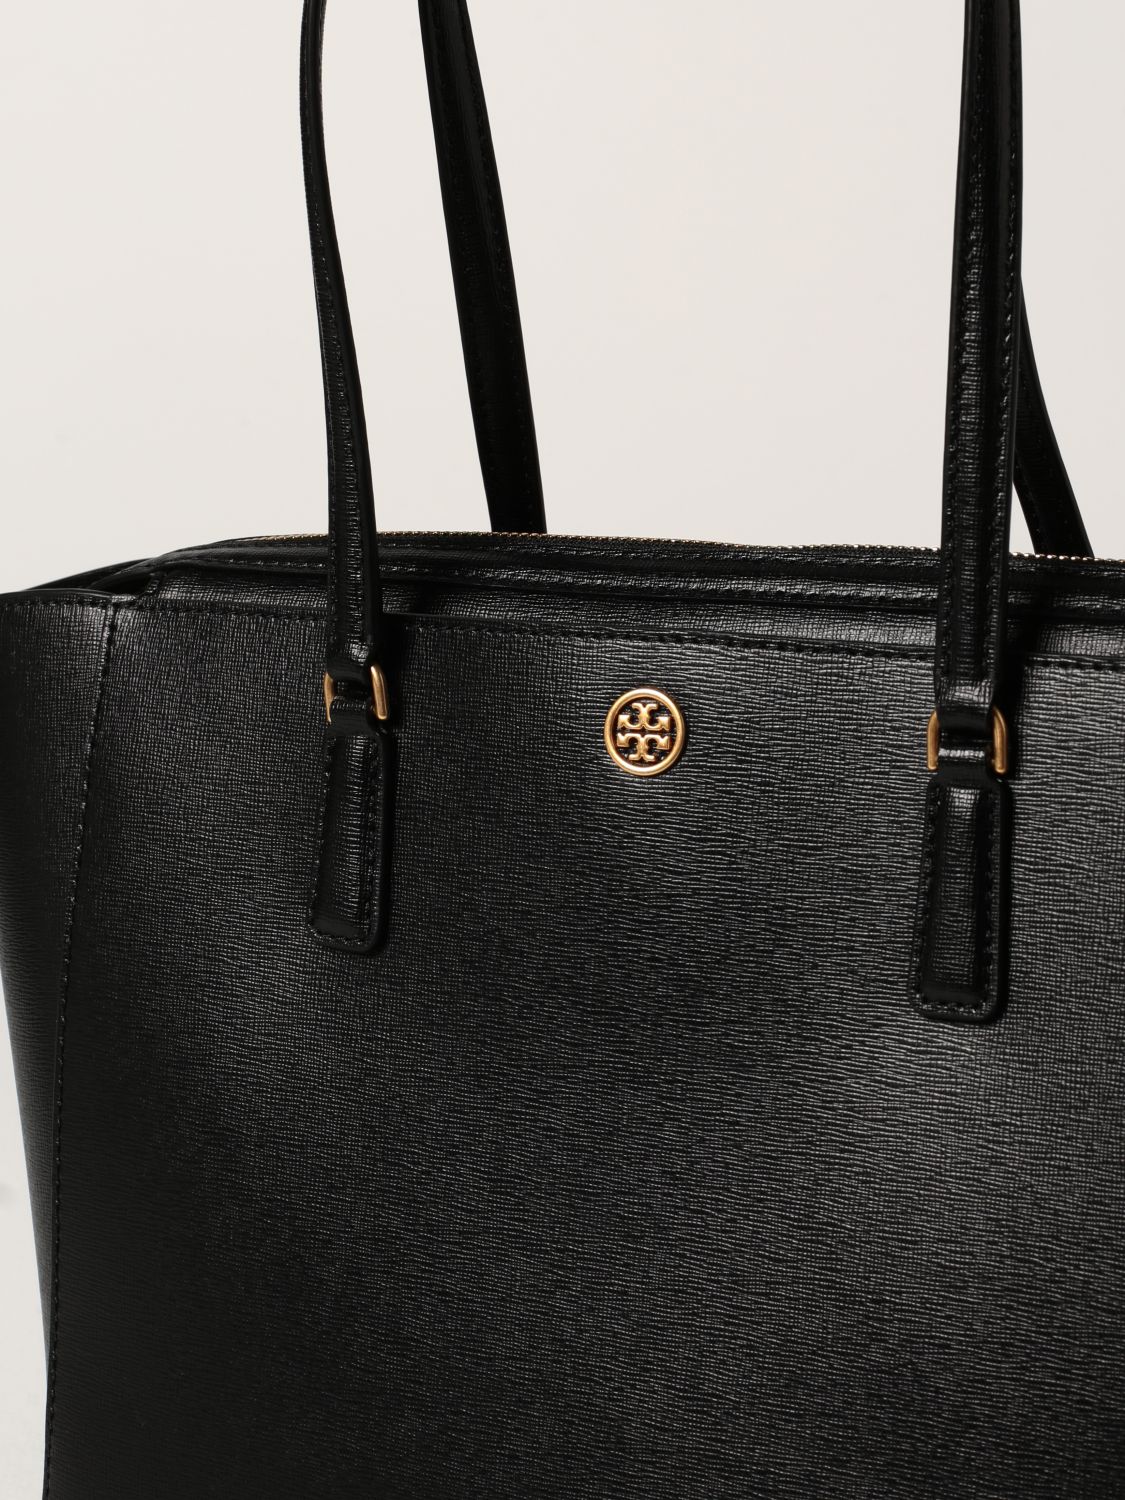 TORY BURCH: Robinson bag in saffiano leather - Black | Tory Burch tote bags  83078 online on 